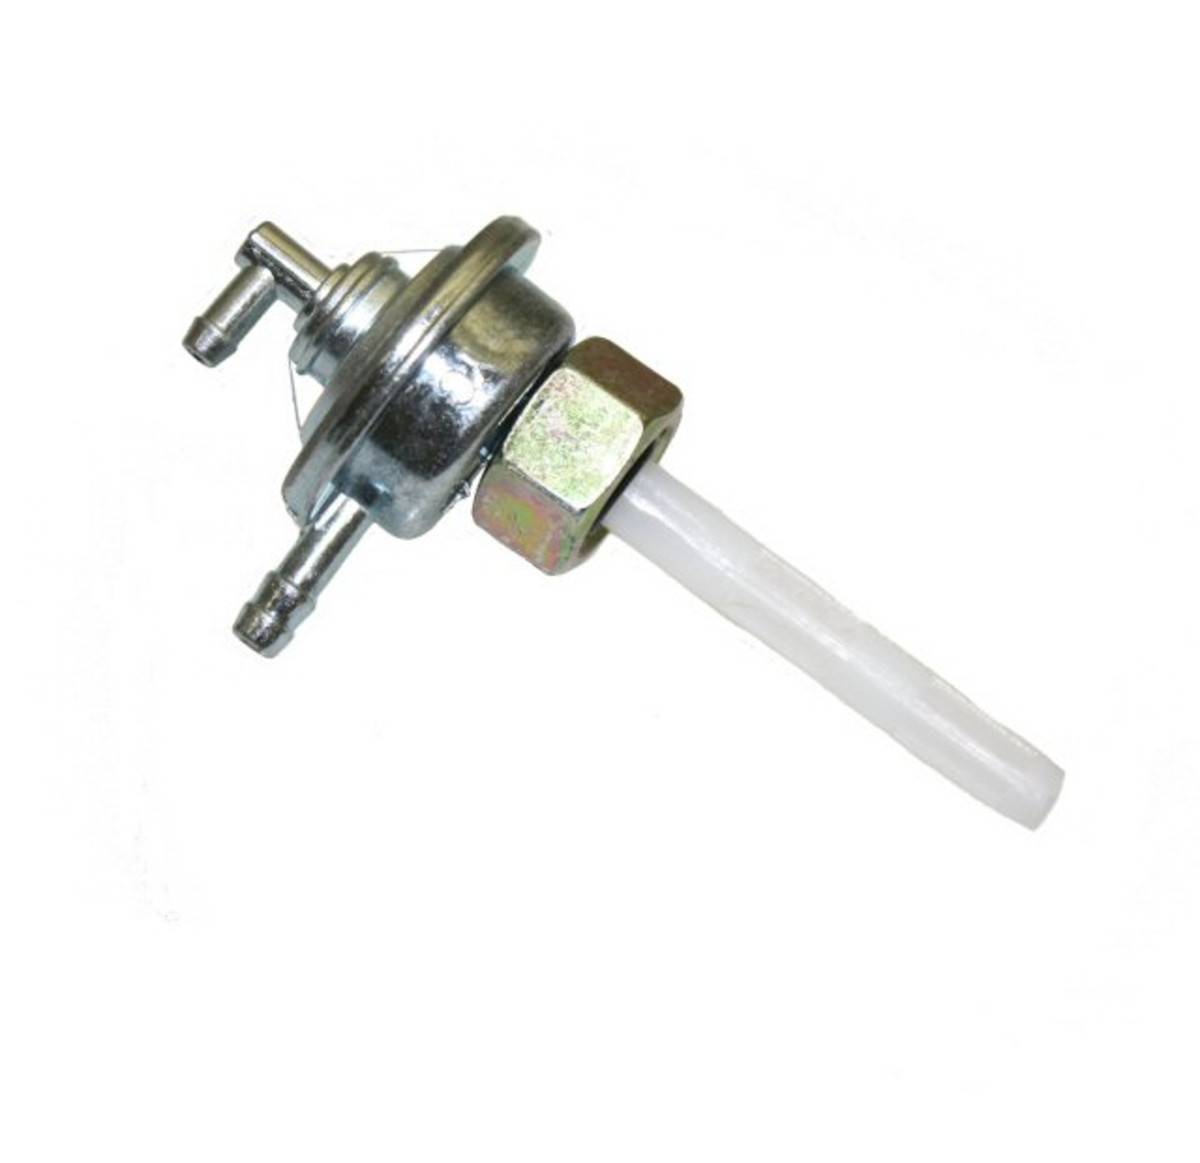 Bolt On Fuel Valve M16x1.50 (4 STROKE BUGGIES & SCOOTERS)